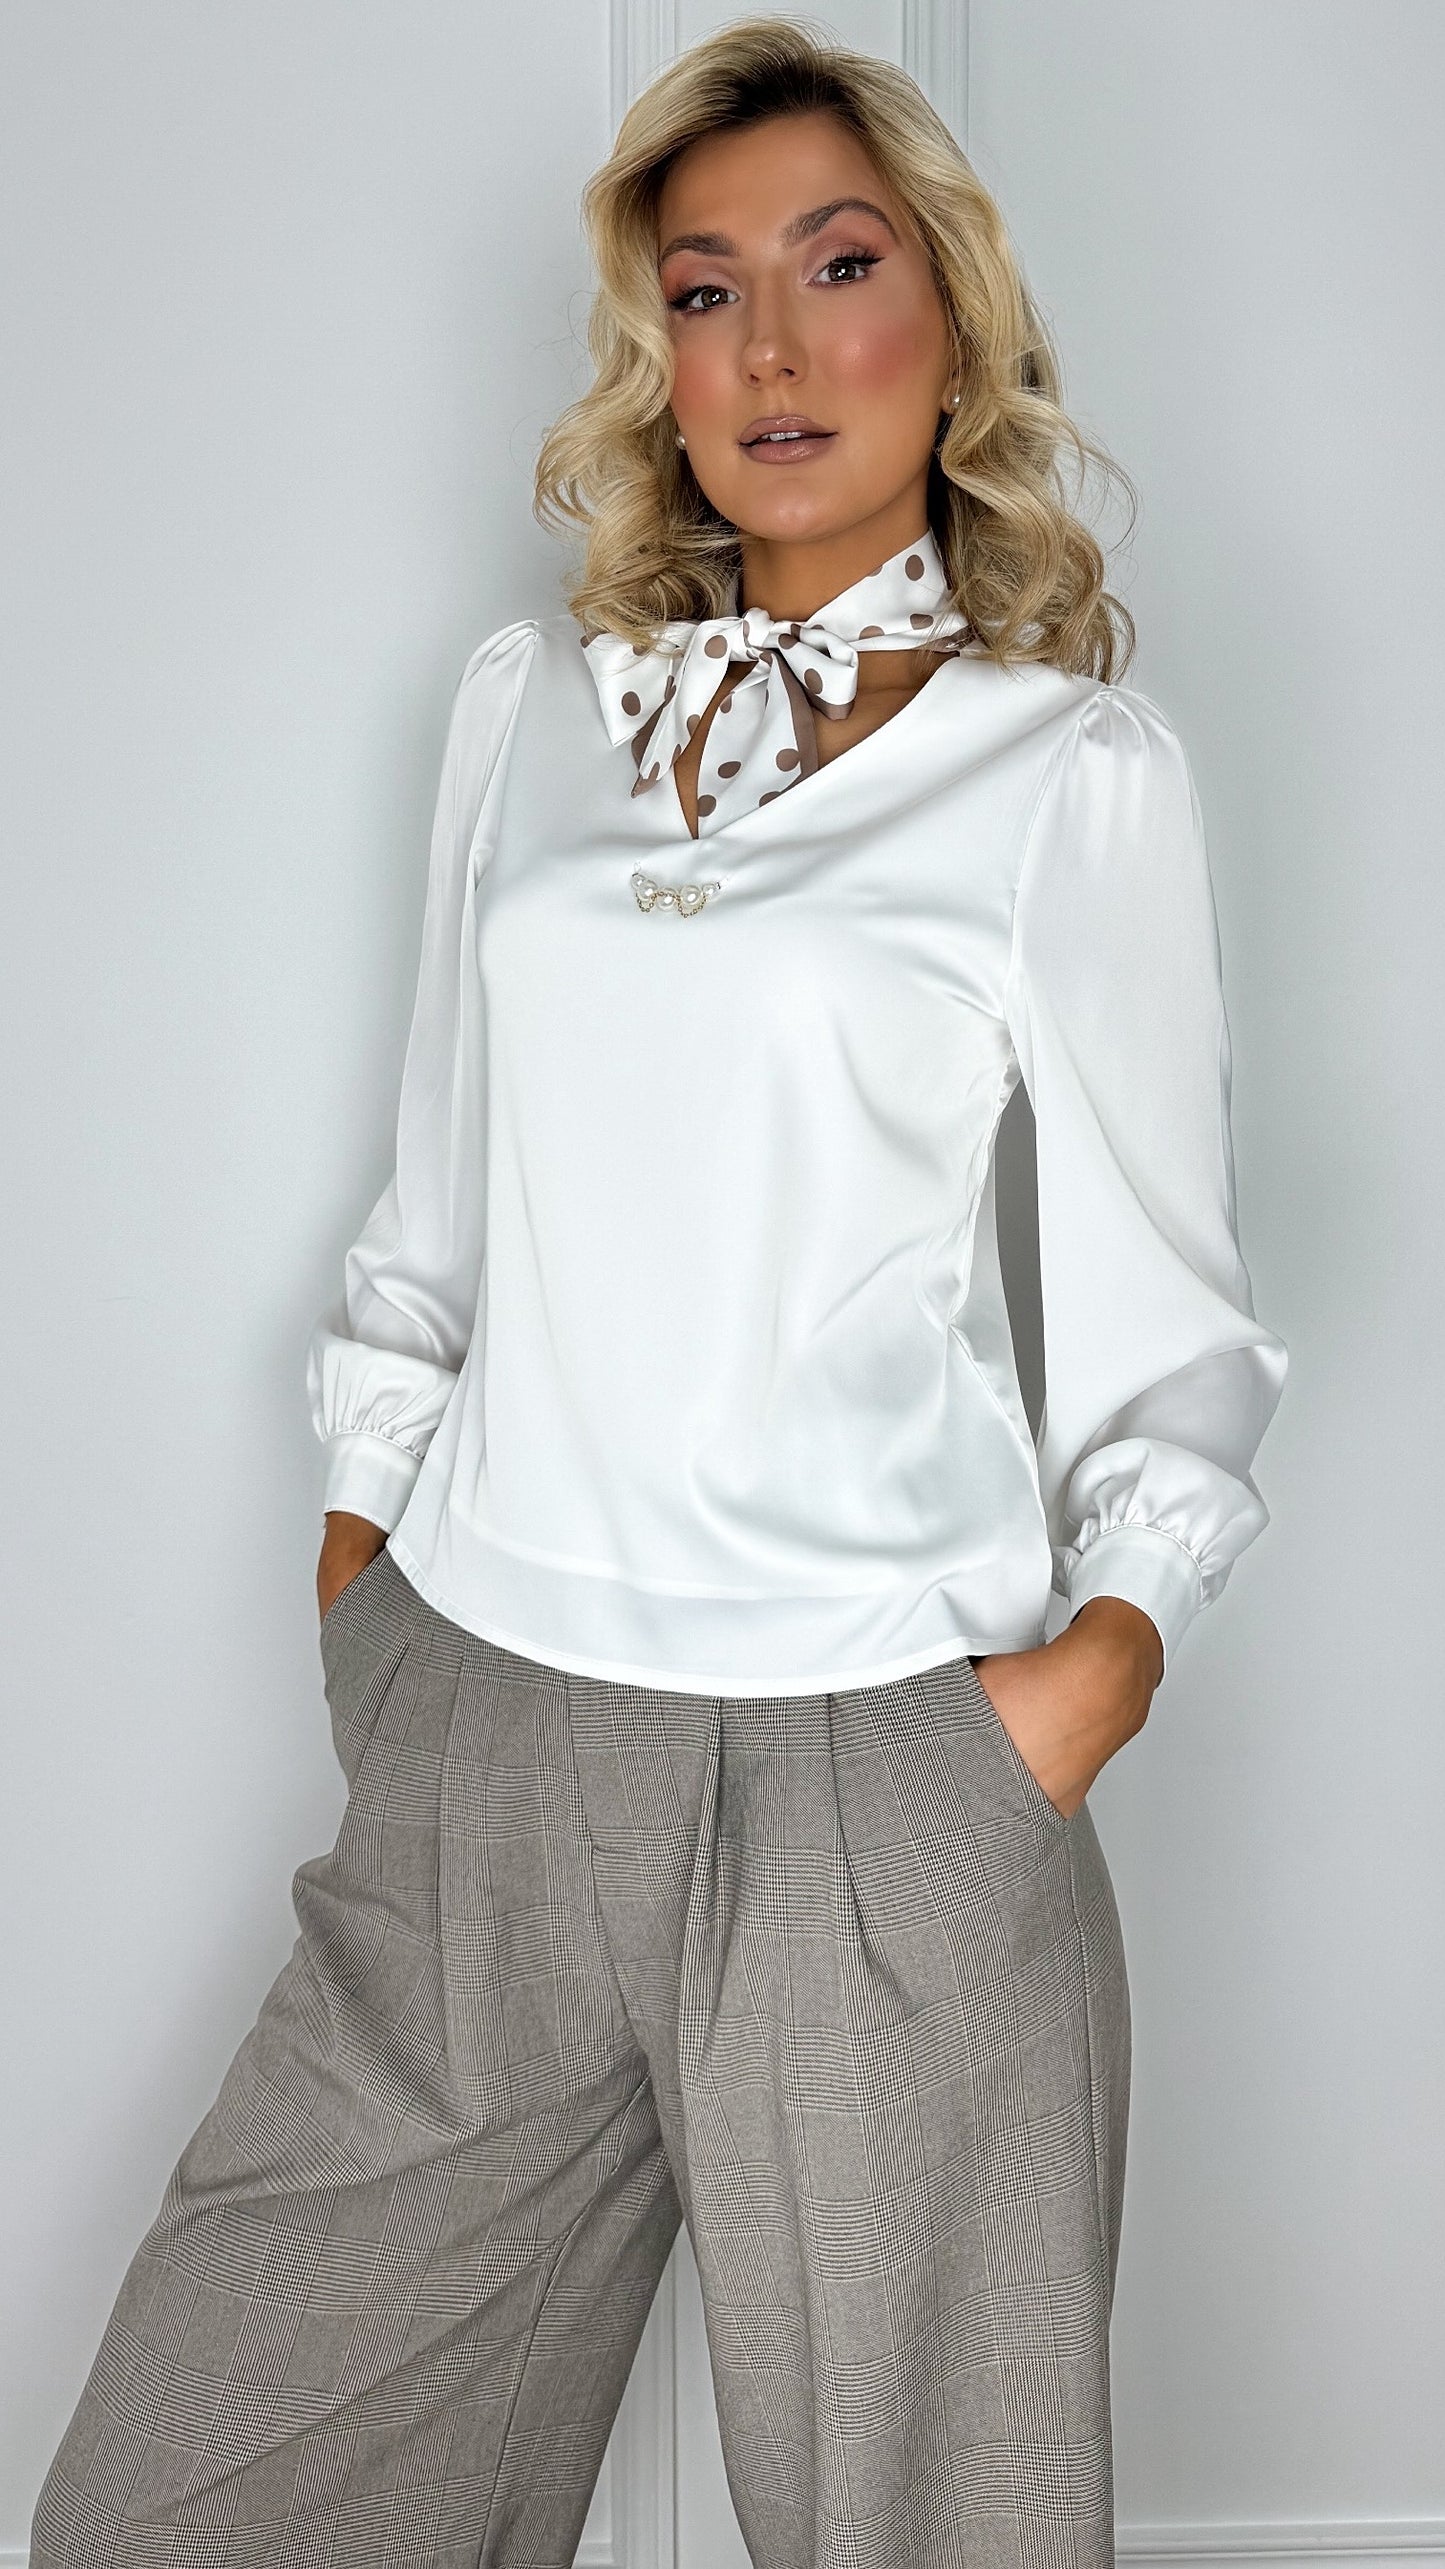 Jenny Satin White Blouse with Polka Dot Bow Tie and Pearls Details